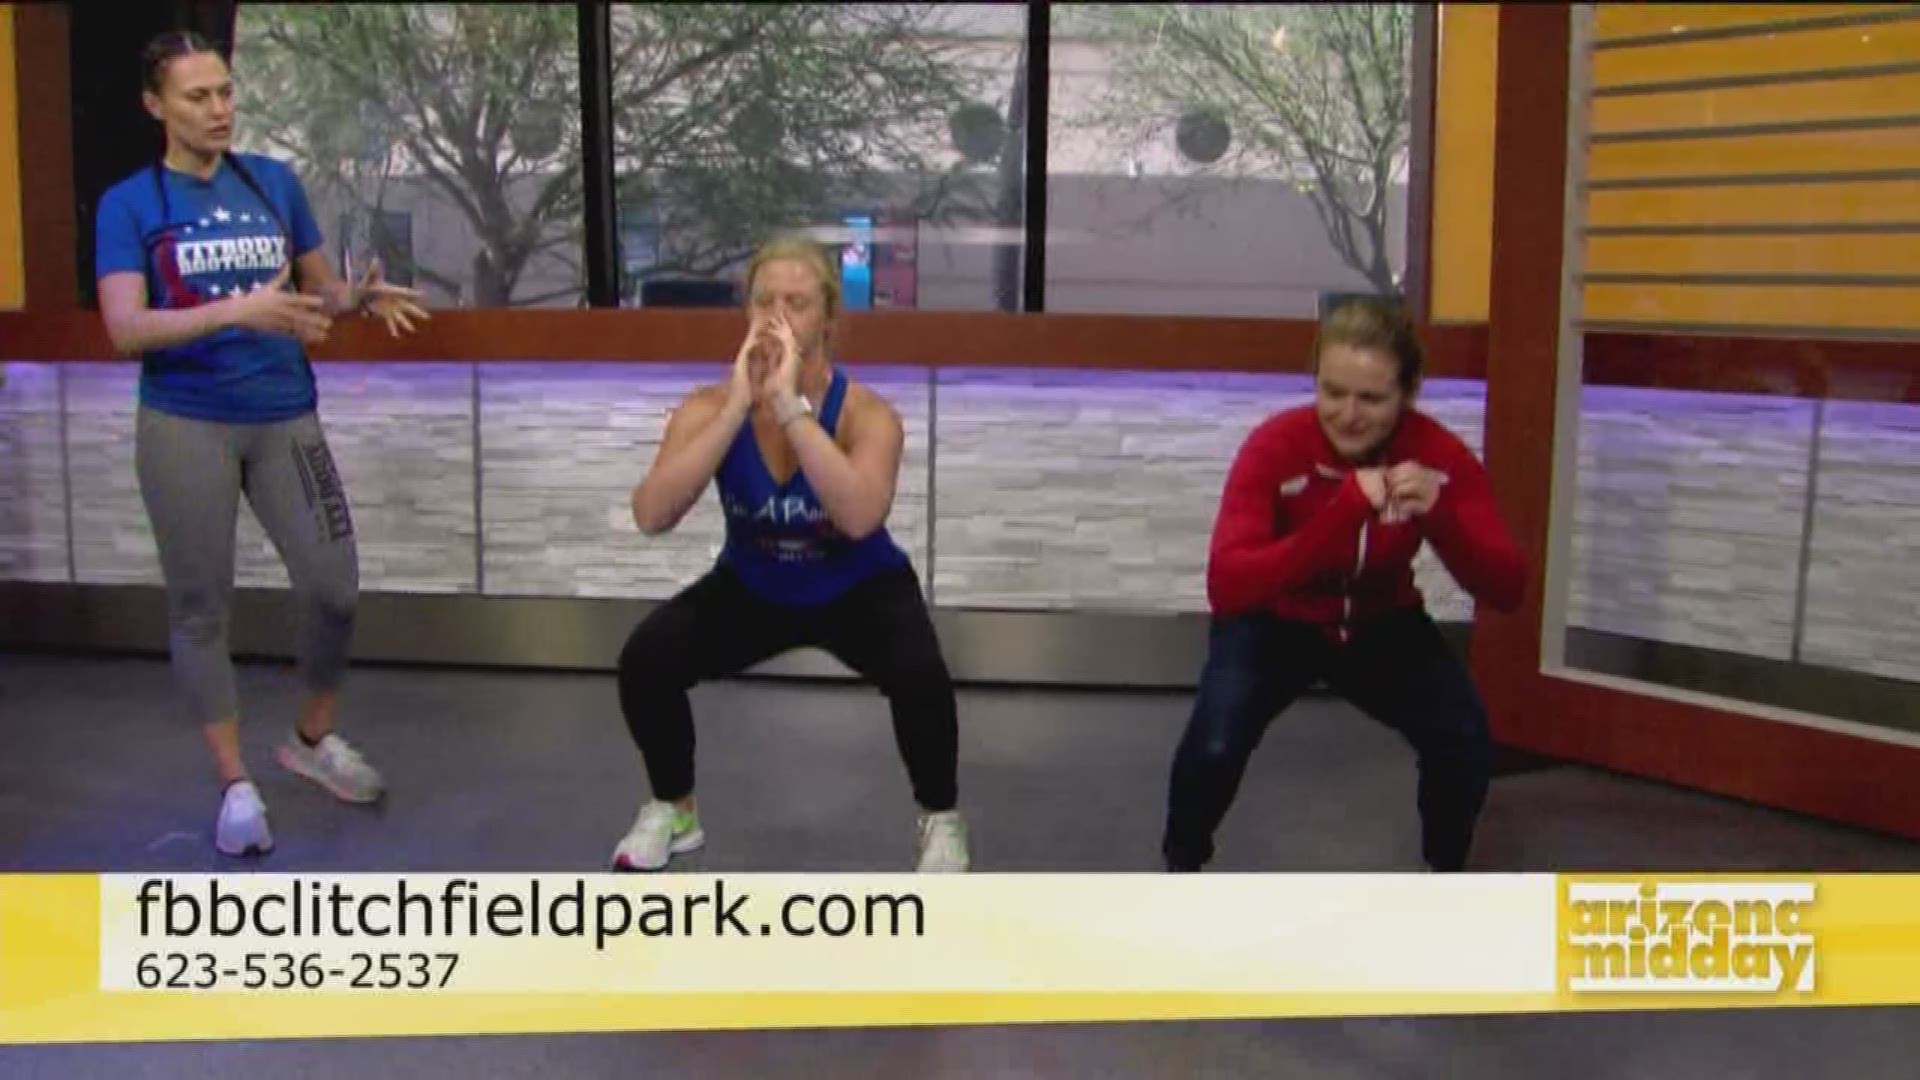 This boot camp will kick your booty! Litchfield Fit Body Boot Camp coach Margherita tells us about their workout success stories!